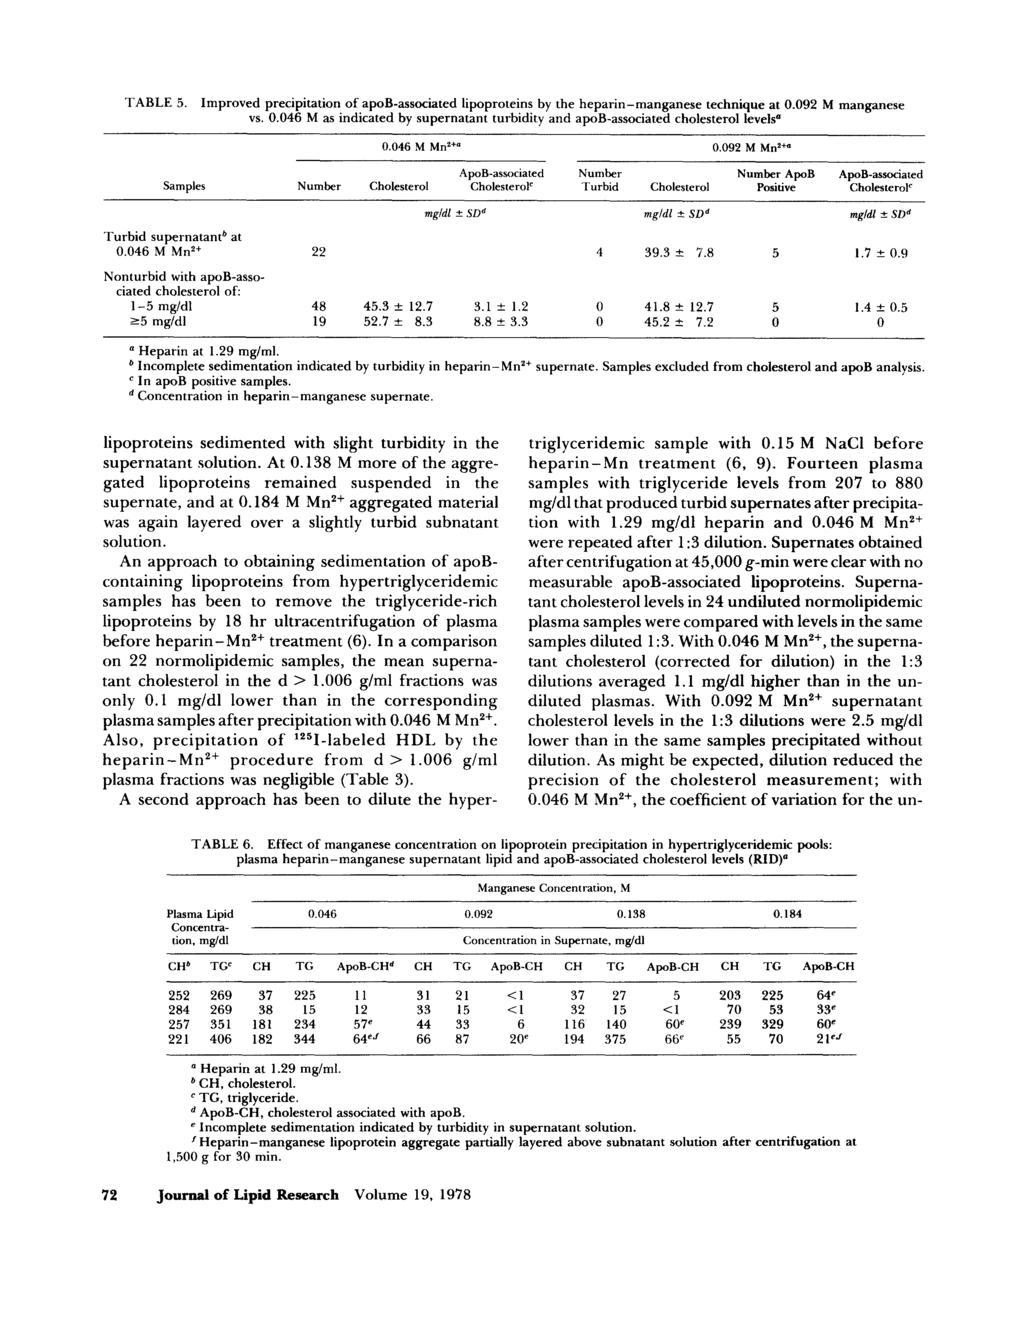 TABLE 5. Improved precipitation of apob-associated lipoproteins by the heparin-manganese technique at 0.